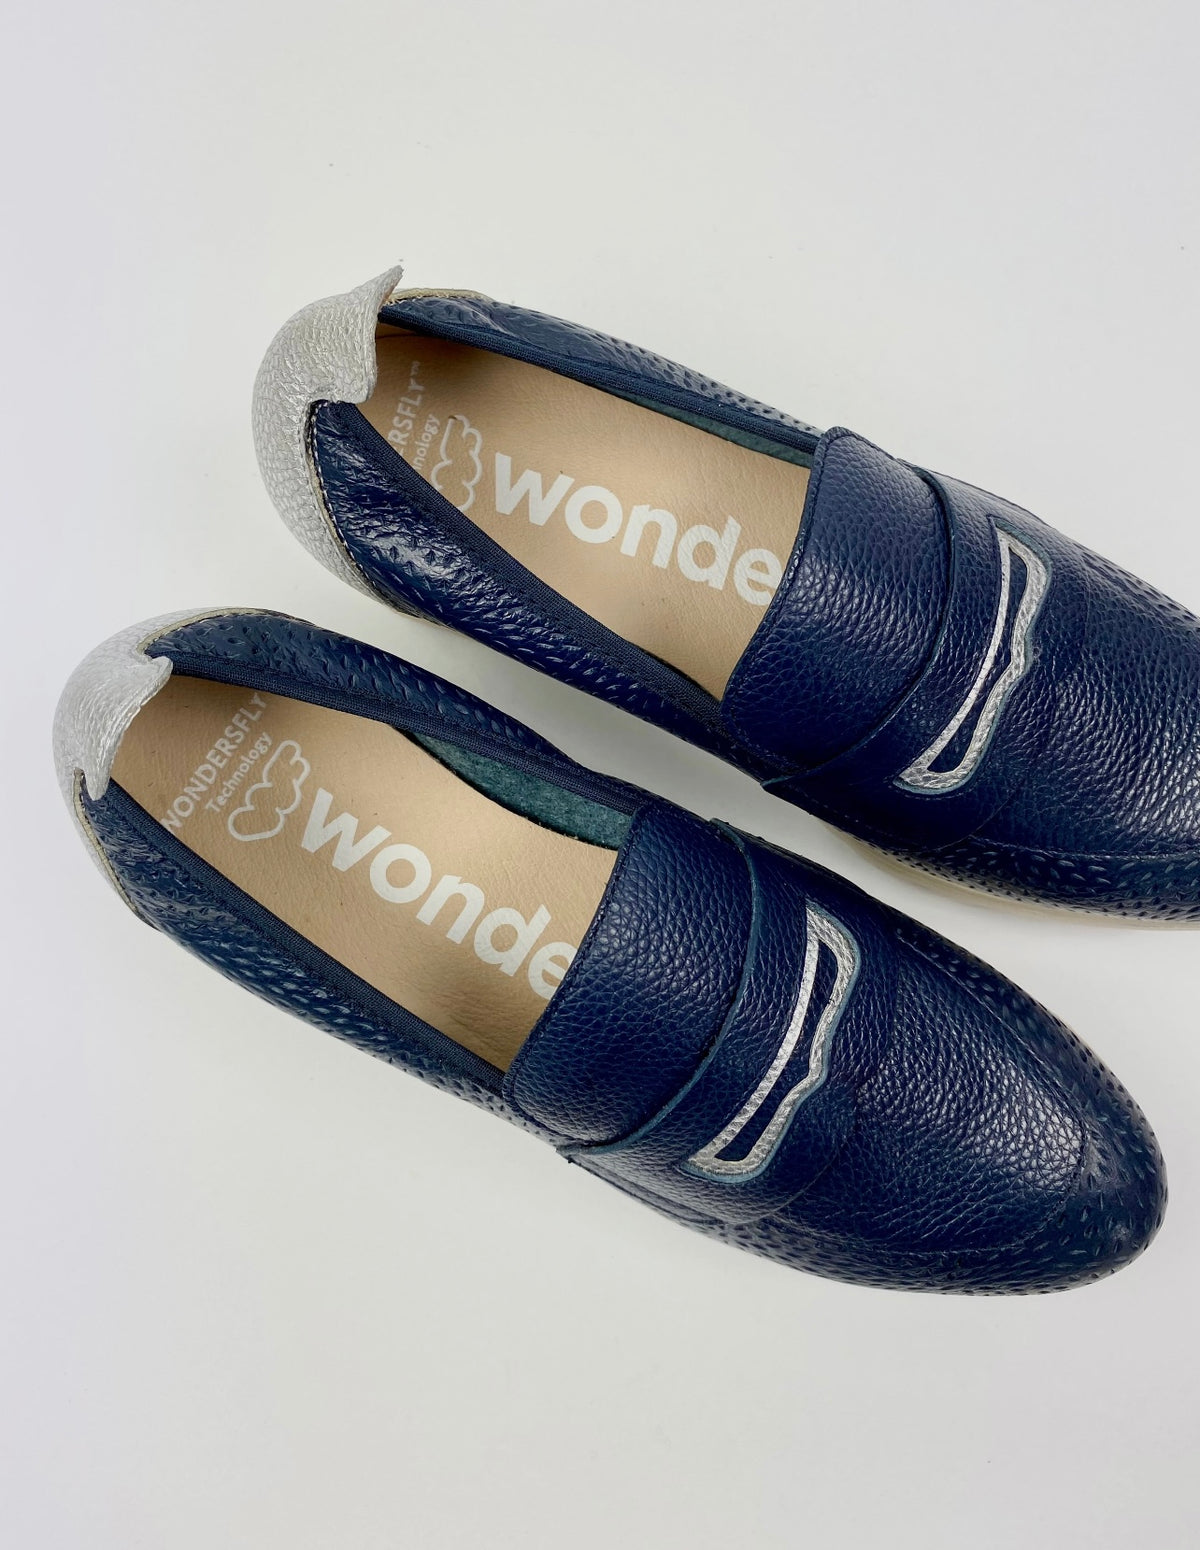 Wonders - C-33314 Navy and Silver Pref Wedge Loafer